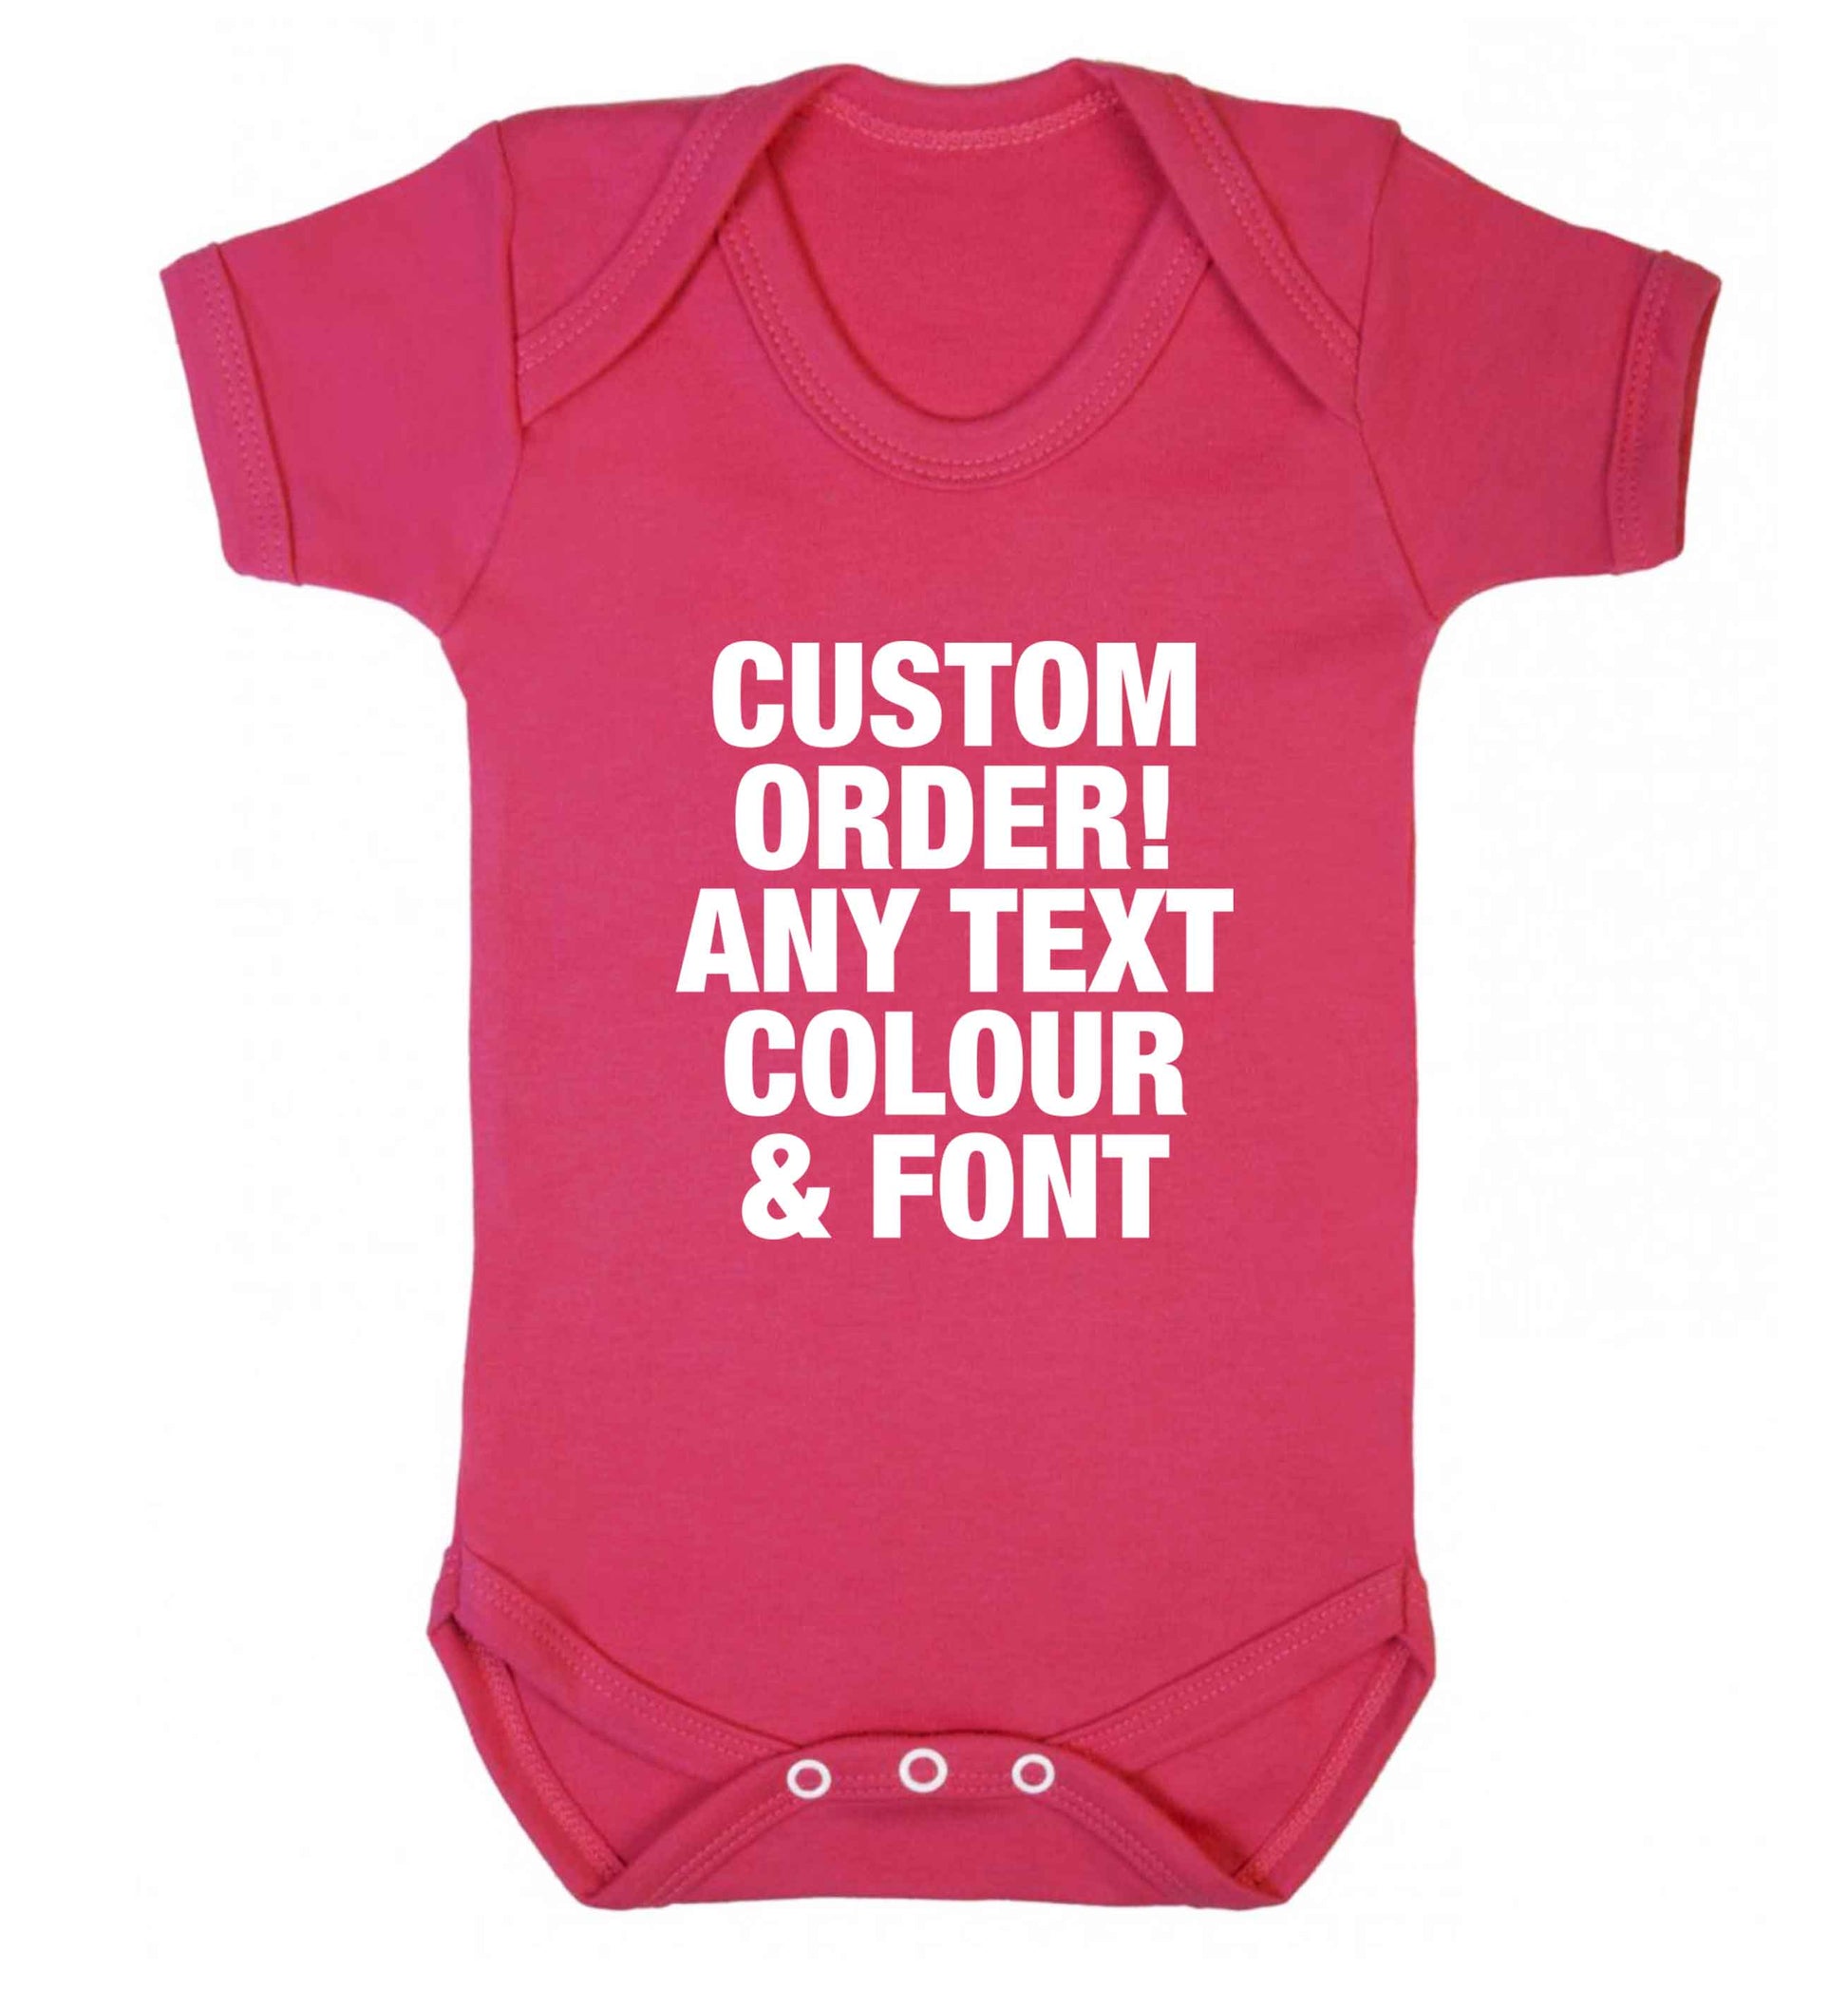 Custom order any text colour and font baby vest dark pink 18-24 months